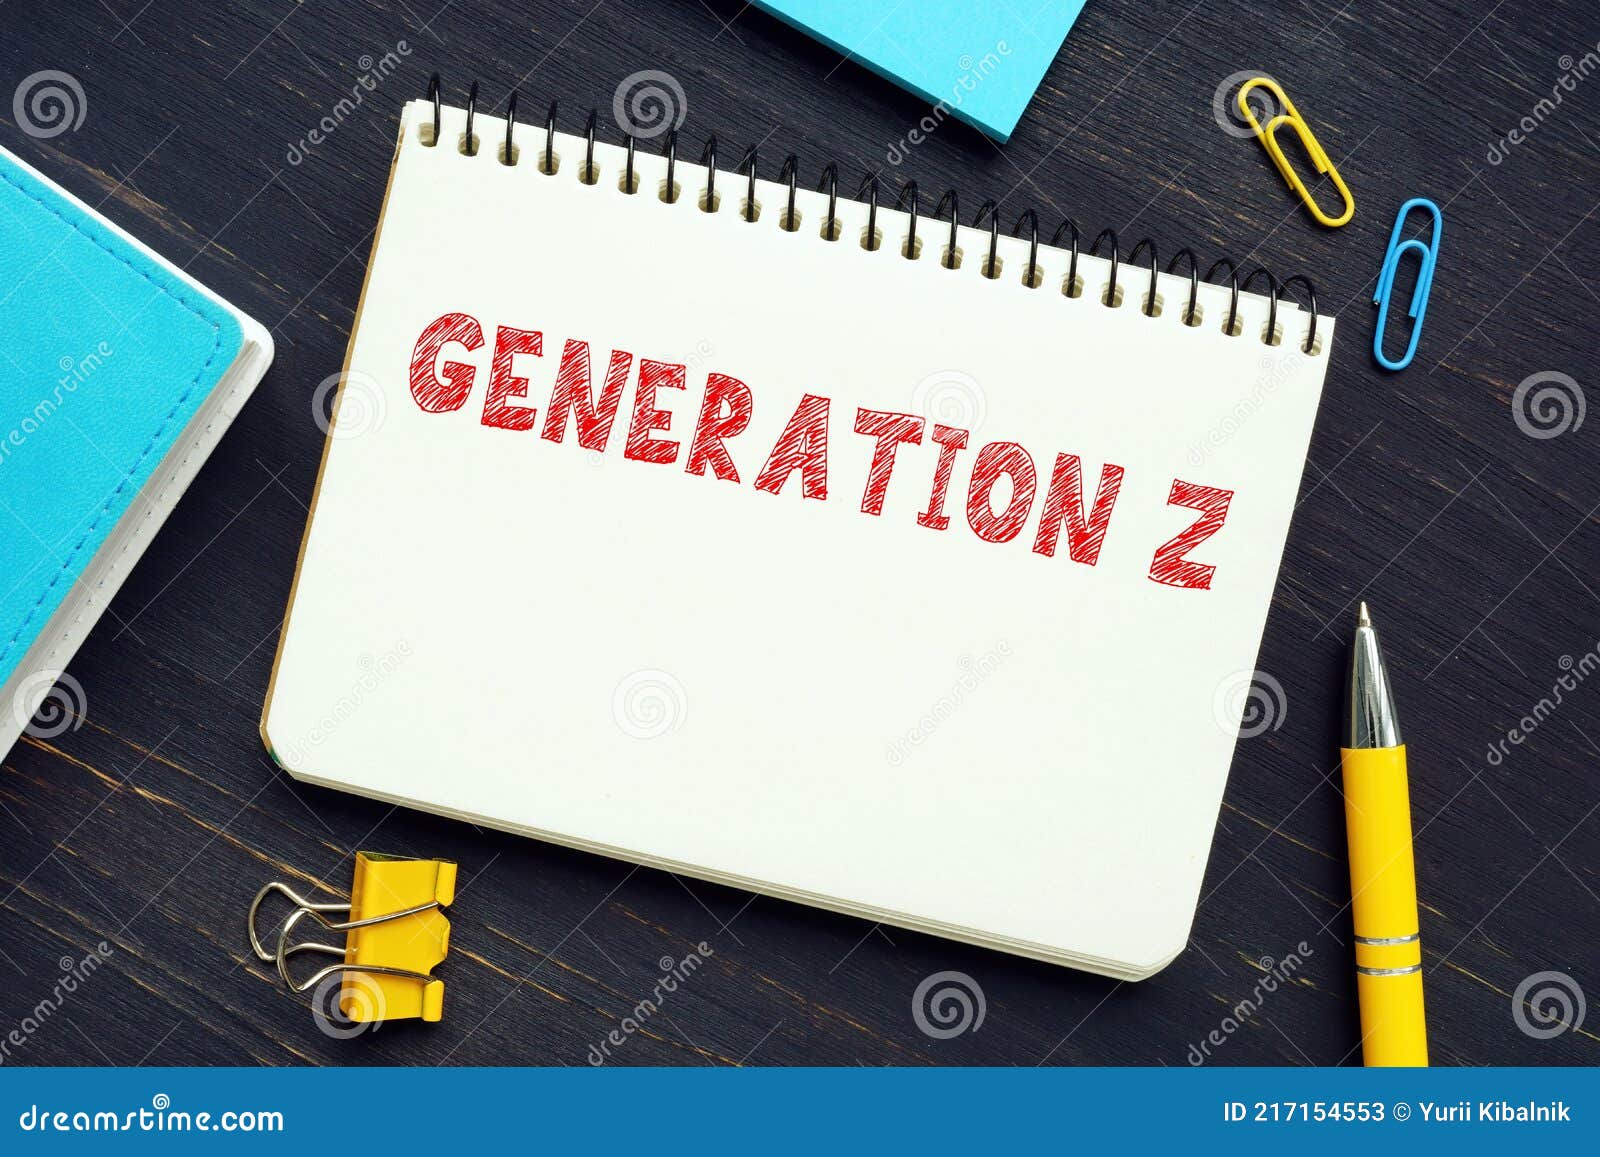 Financial Concept about GENERATION Z with Inscription on the Sheet. Gen Z, IGen, or Centennials, To TheÂ generationÂ that Stock Image - Image of debt, people: 217154553